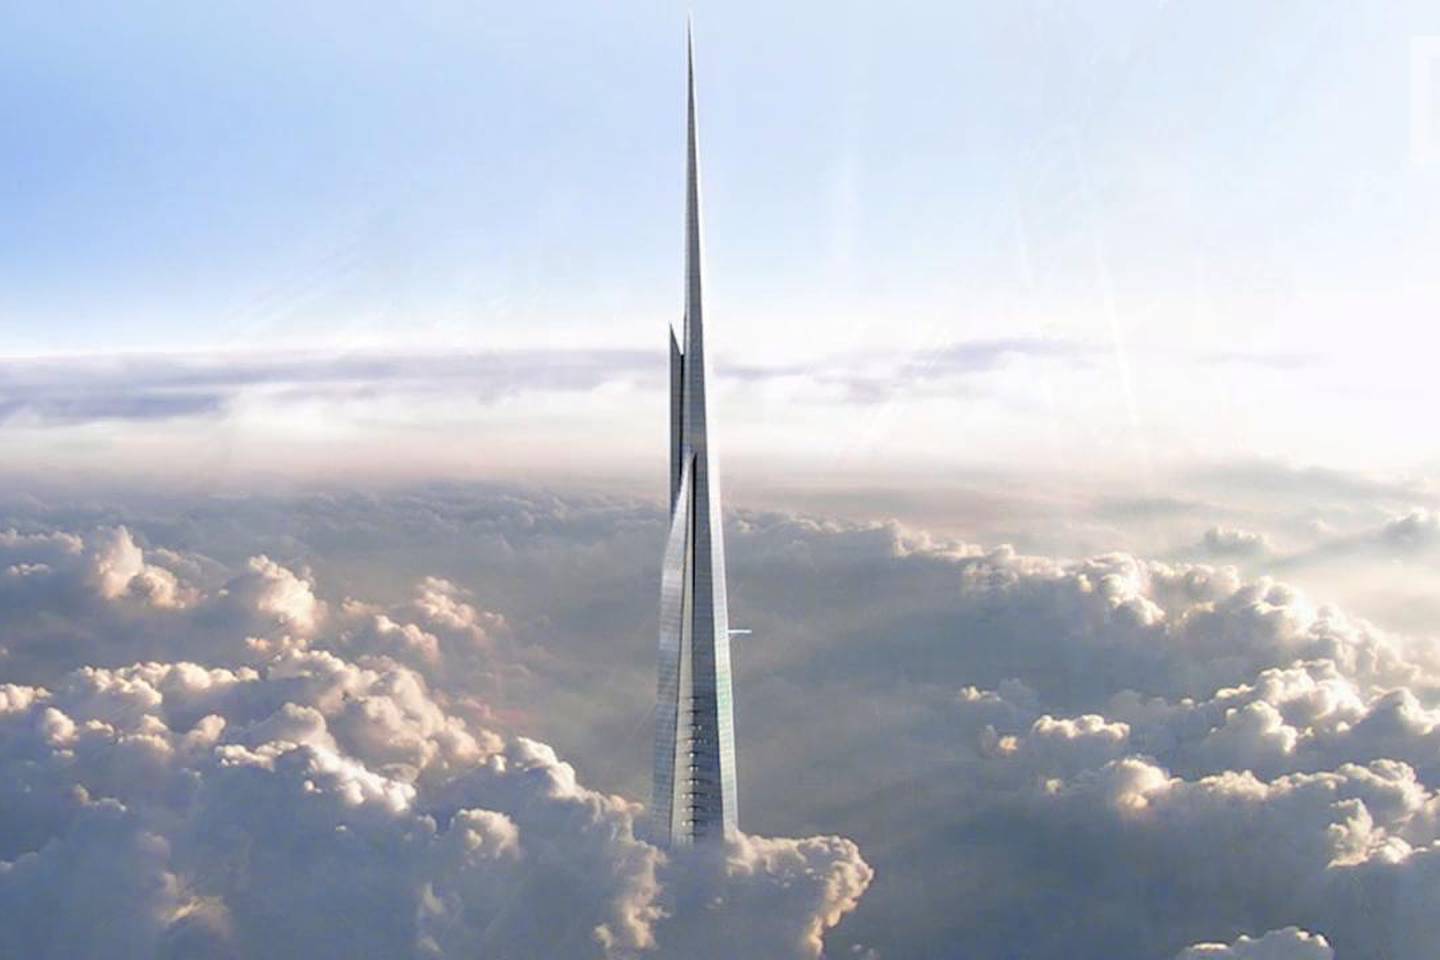 An inside look at the world's future tallest building